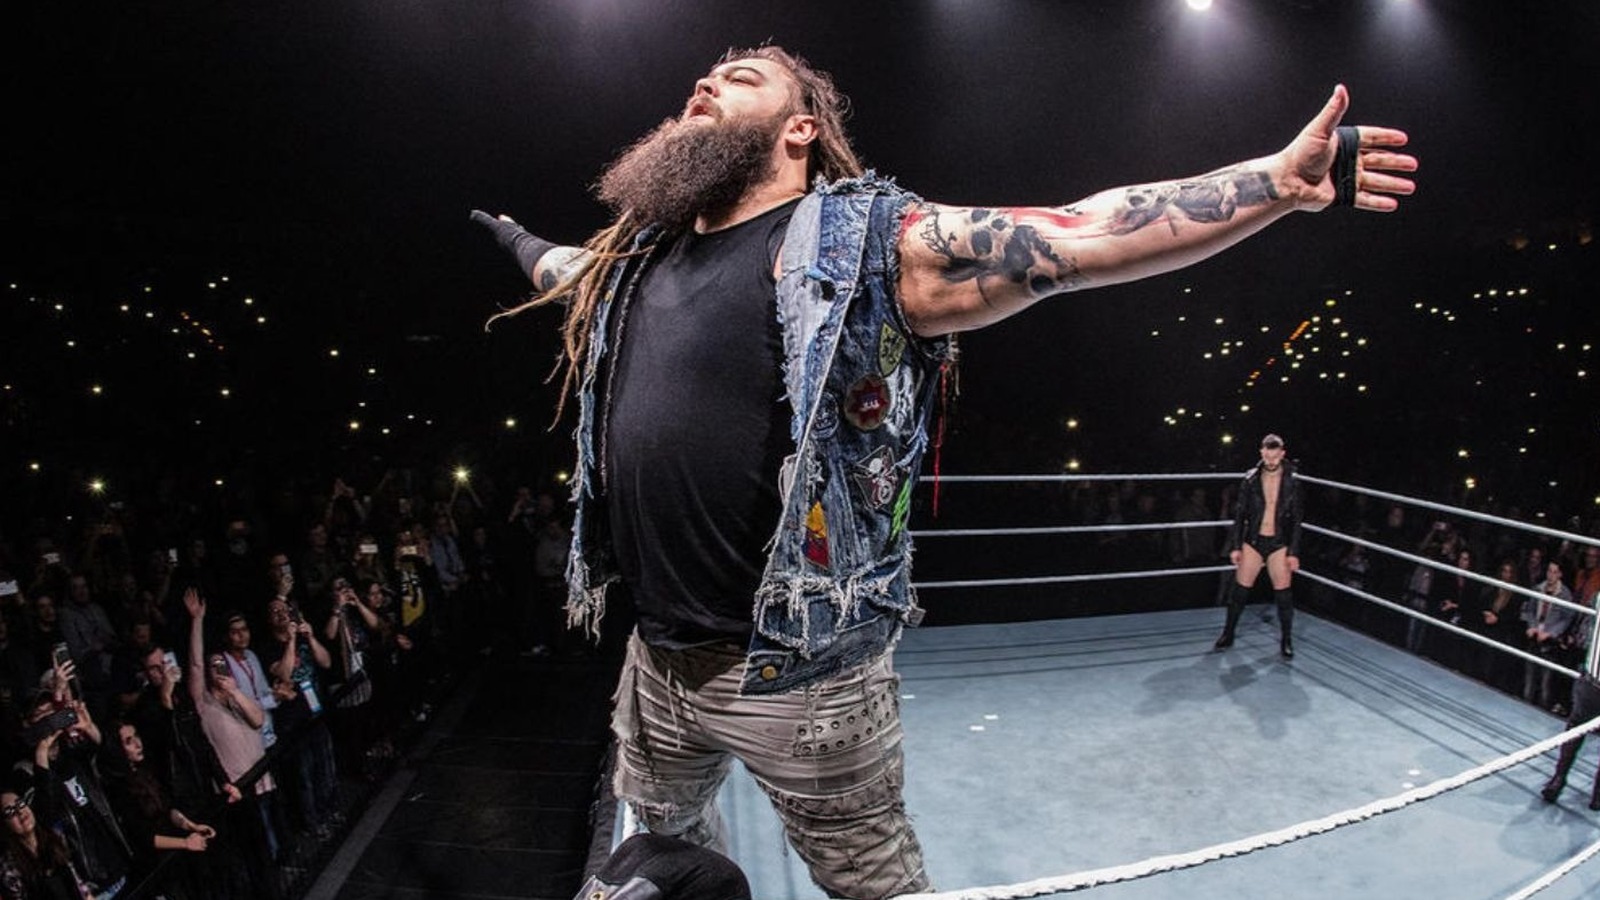 Original Plans For Tonight's WWE SmackDown Scrapped In Favor Of Tribute To Bray Wyatt